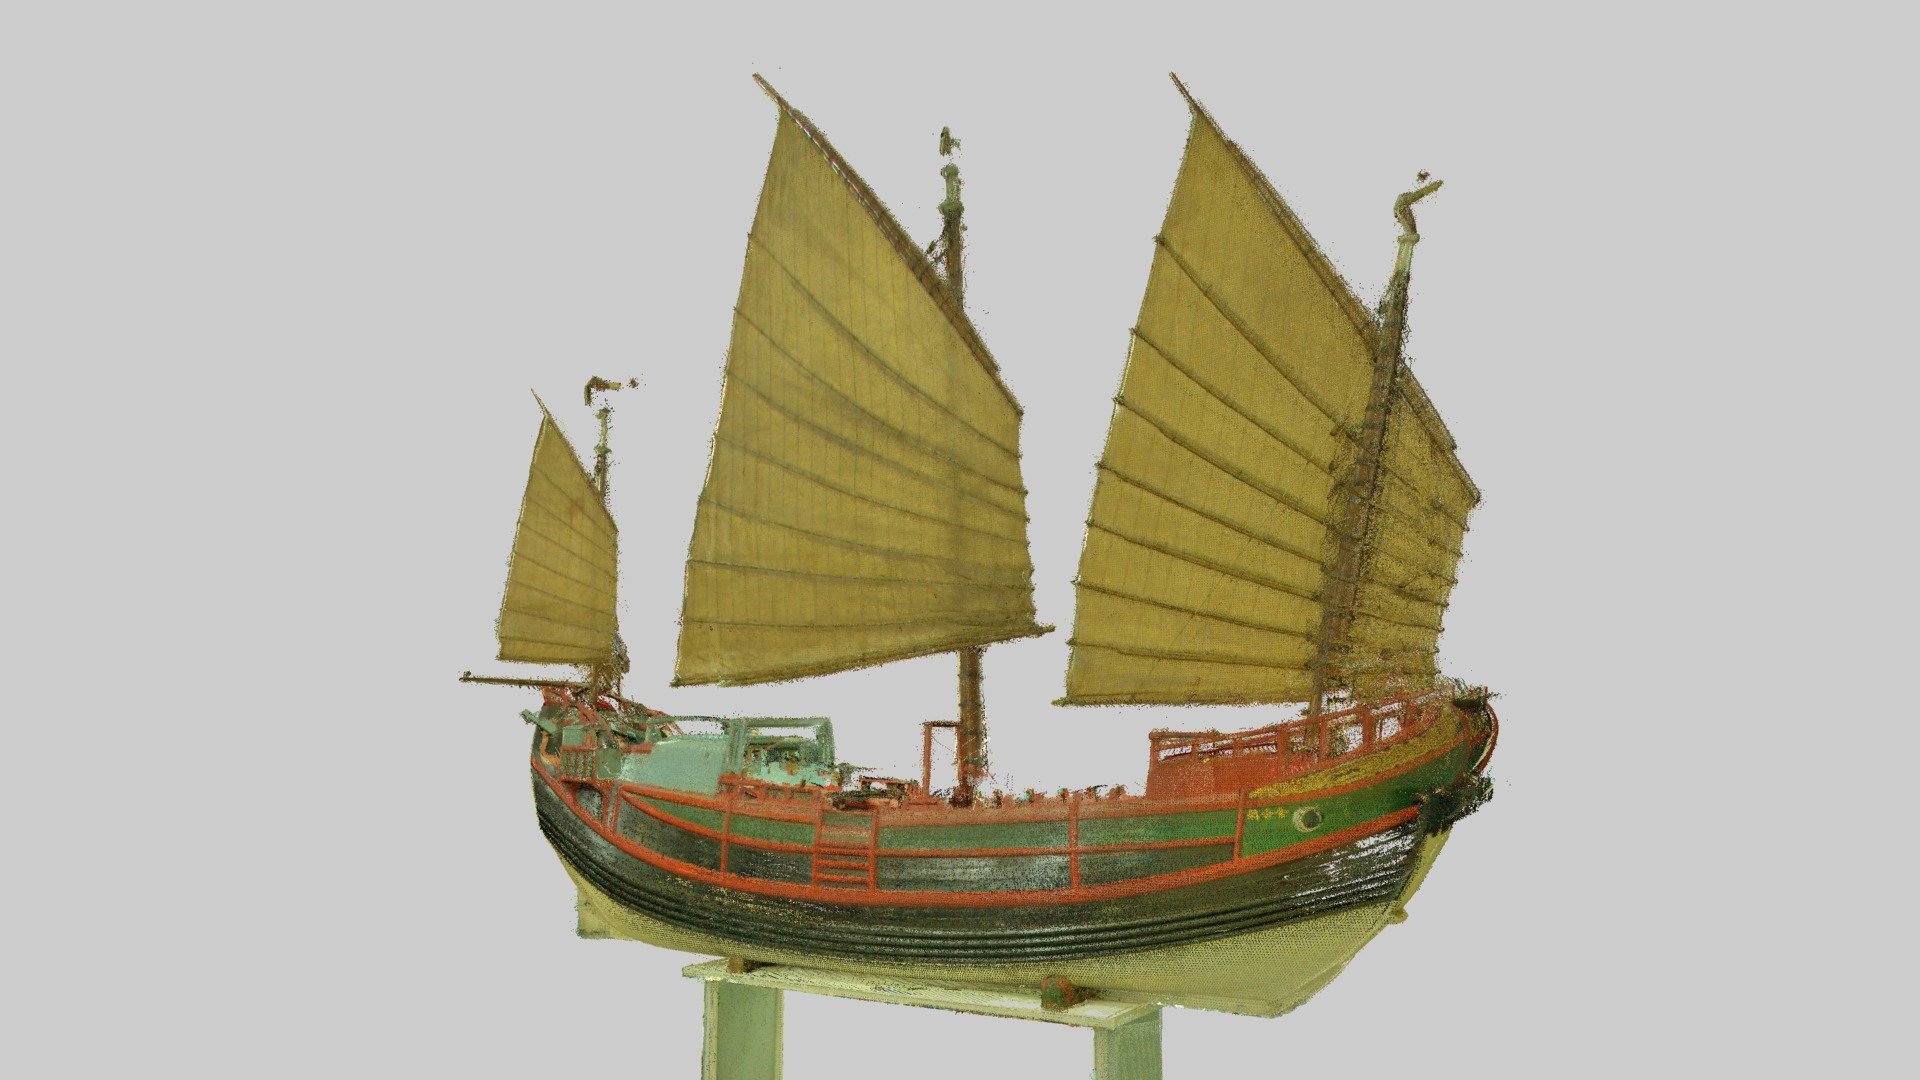 Chinese Junk Ship - Science Museum